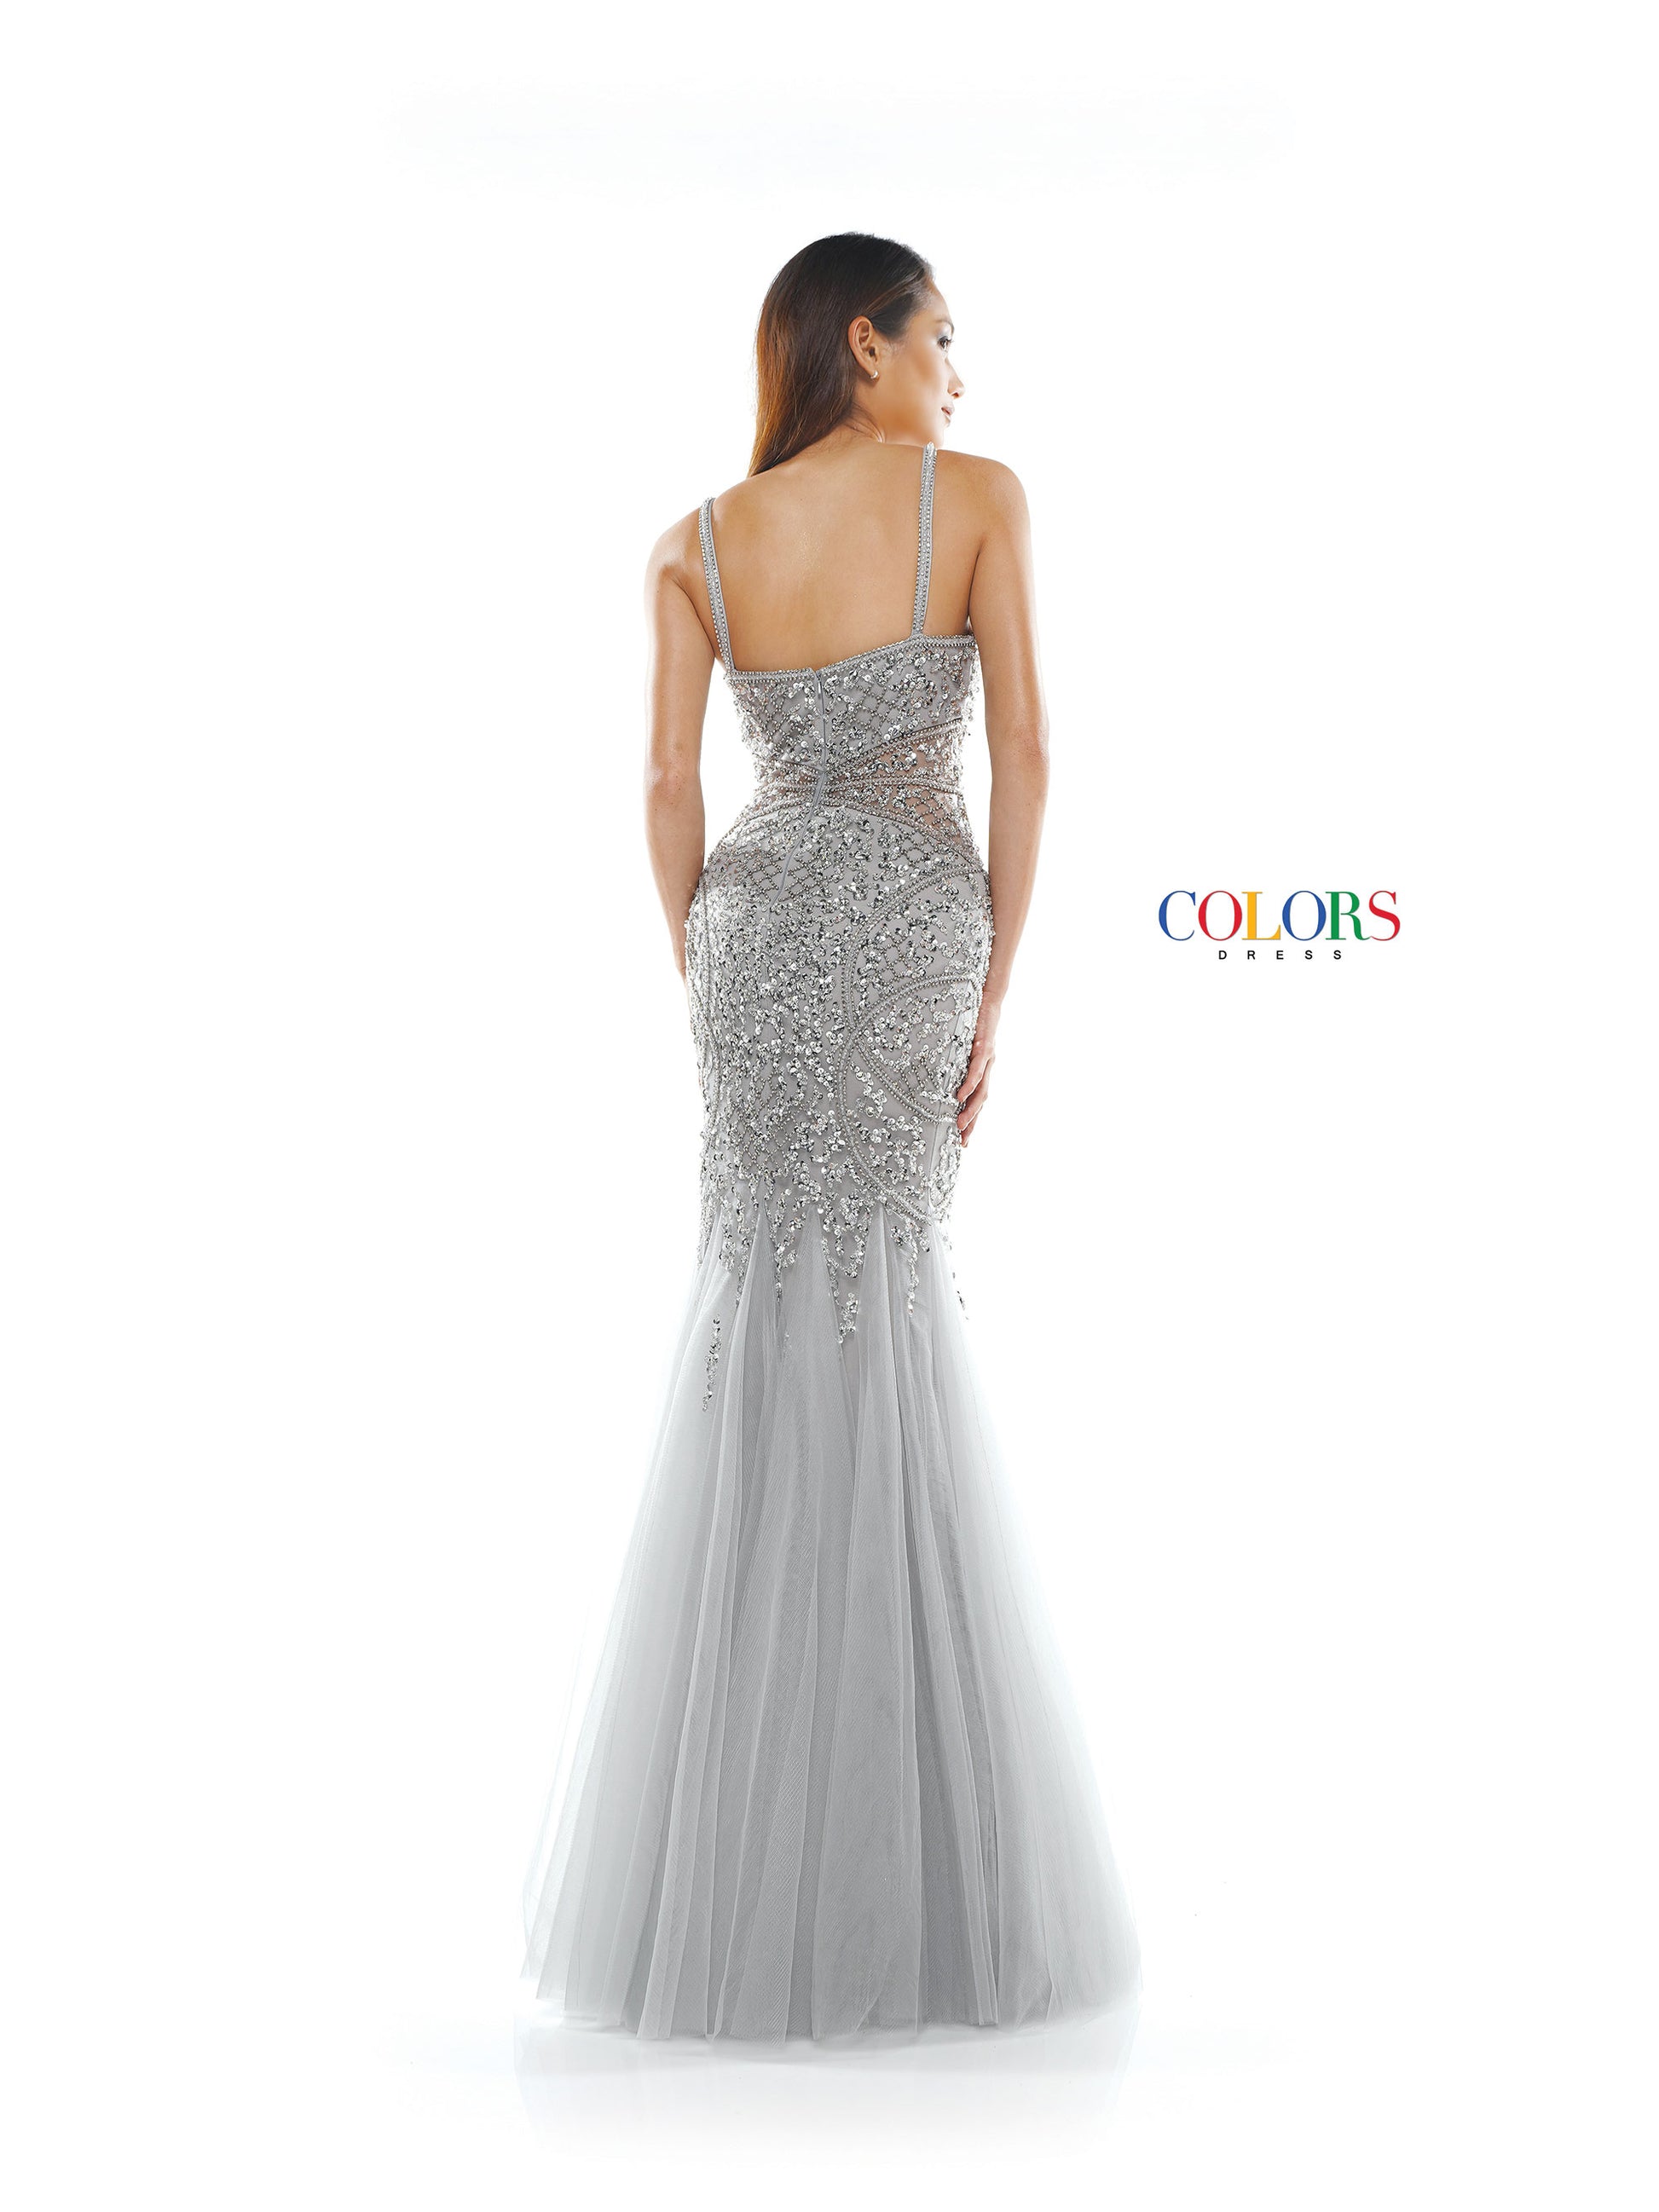 Colors Dress 2230 Silver Mermaid Prom or Evening dress with an all over delicately beaded bodice mermaid dress in sweet heart neckline, tulle godet, beaded strap